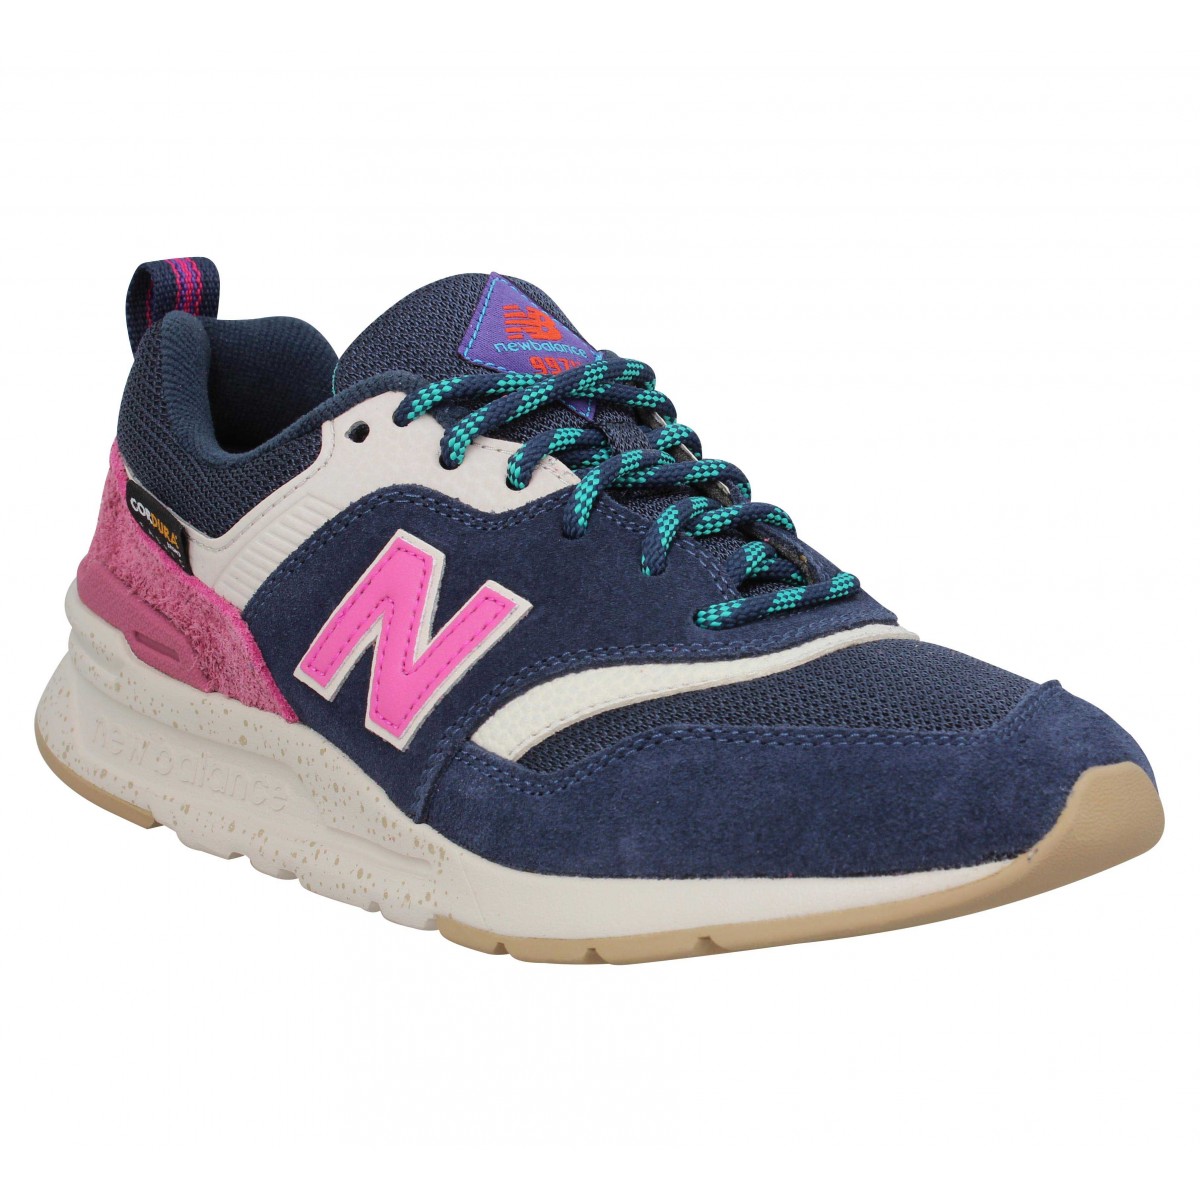 new balance 997 femme Cheaper Than Retail Price> Buy Clothing ...